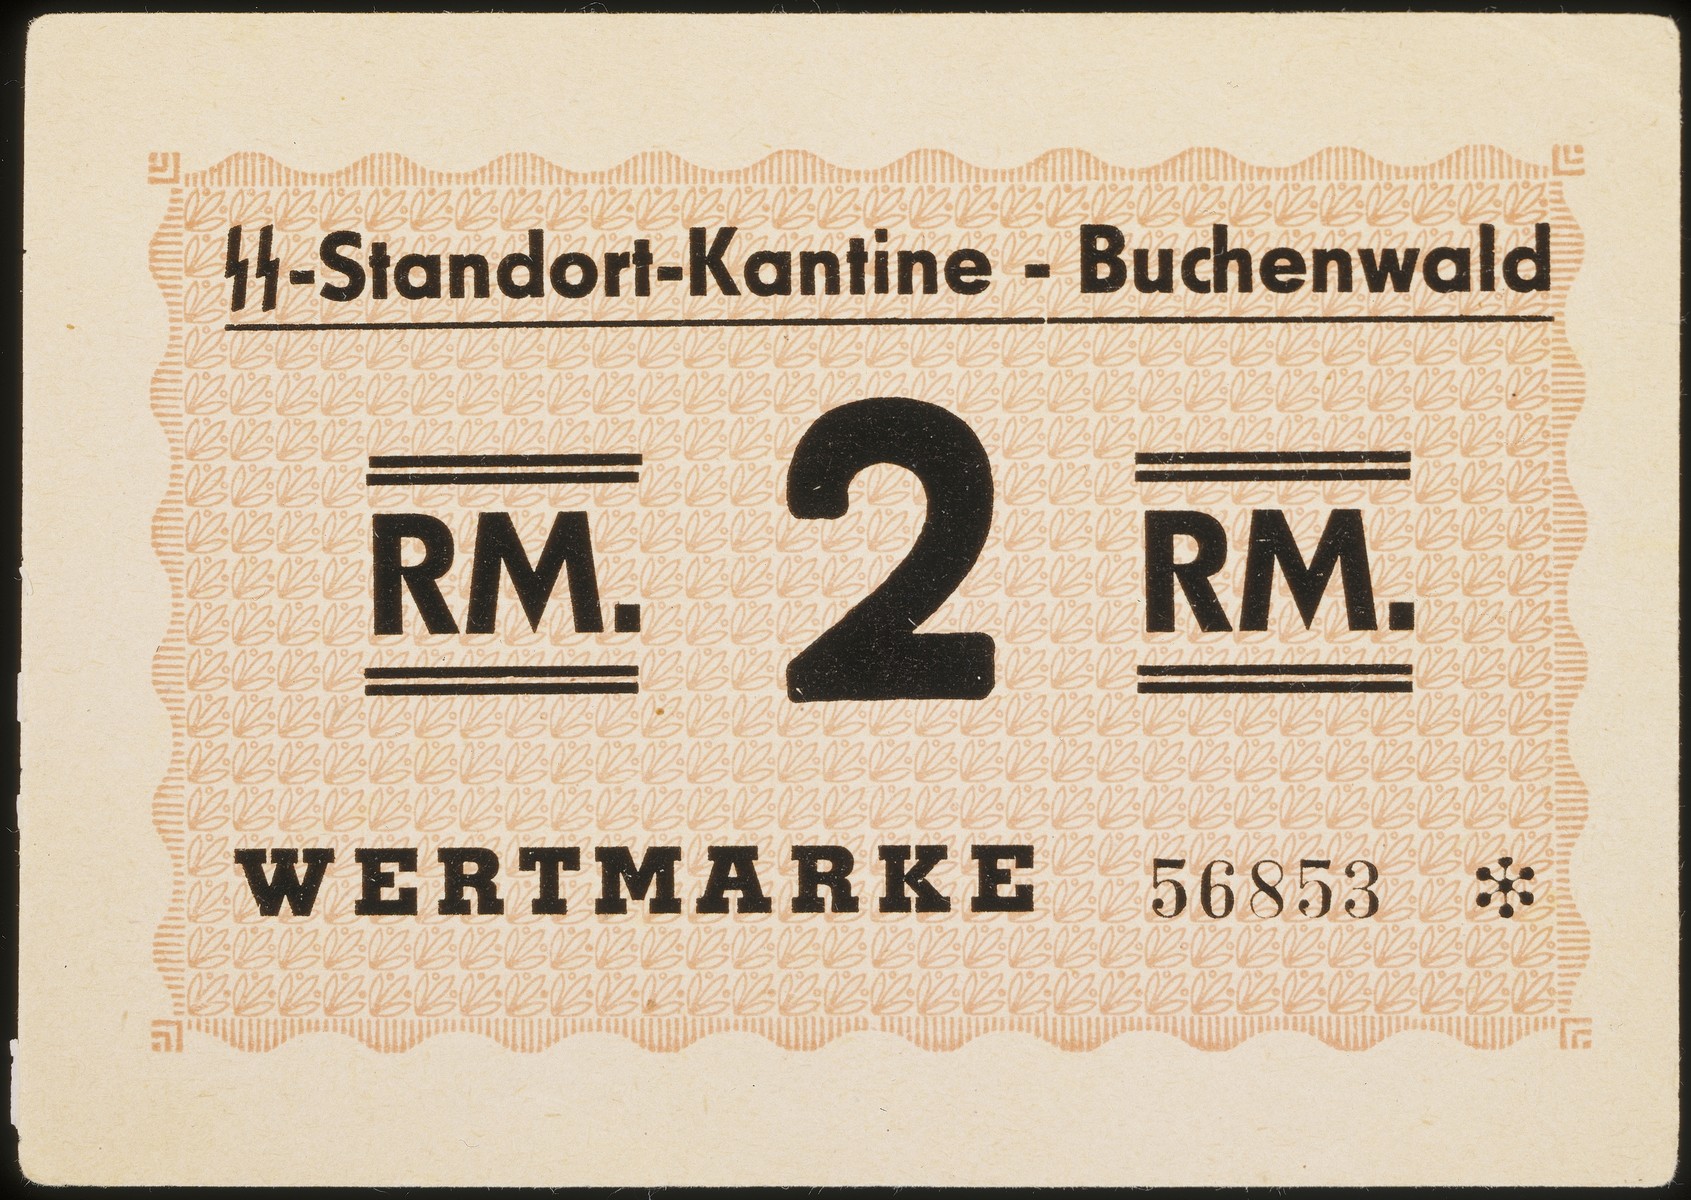 2 Reichs Mark note from the Buchenwald concentration camp.

Printed on the front of the bill is: "SS-Standort-Kantine-Buchenwald; RM 2 RM/ Wertmarke 56853 [SS Standort Cantine; 2 Reichs Marks; standard value, serial number 56853].